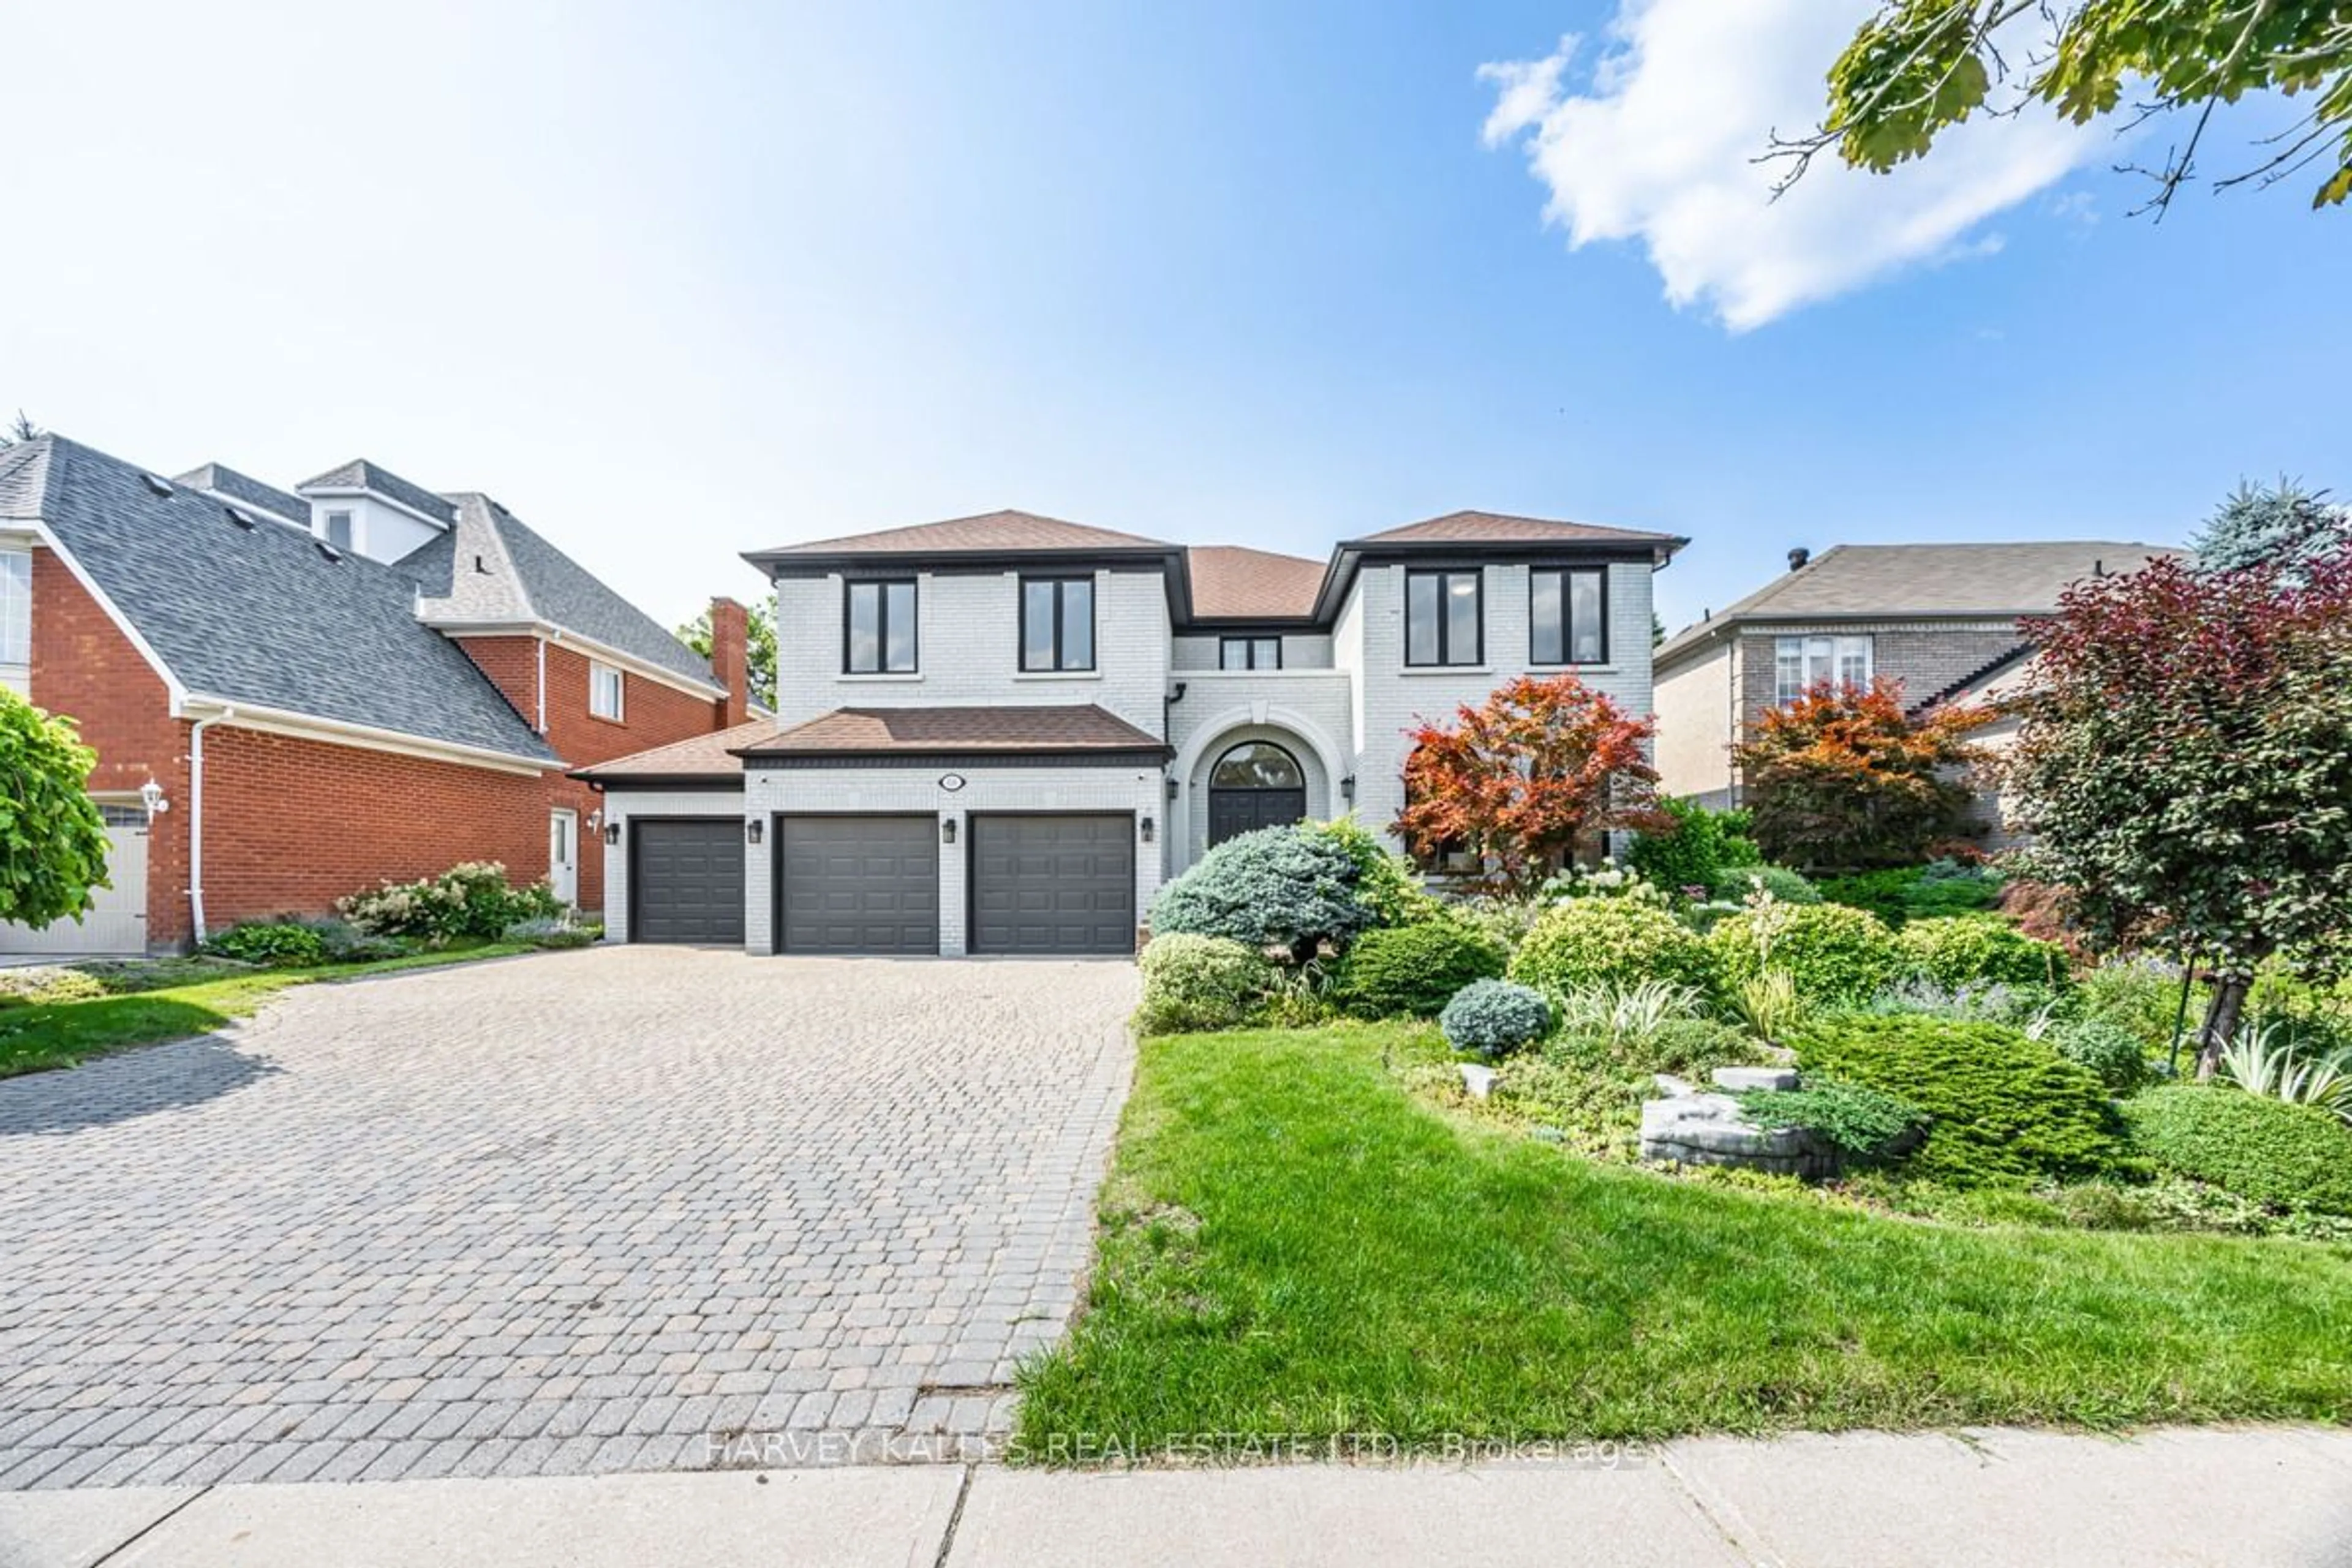 Home with brick exterior material for 68 Boake Tr, Richmond Hill Ontario L4B 3H2